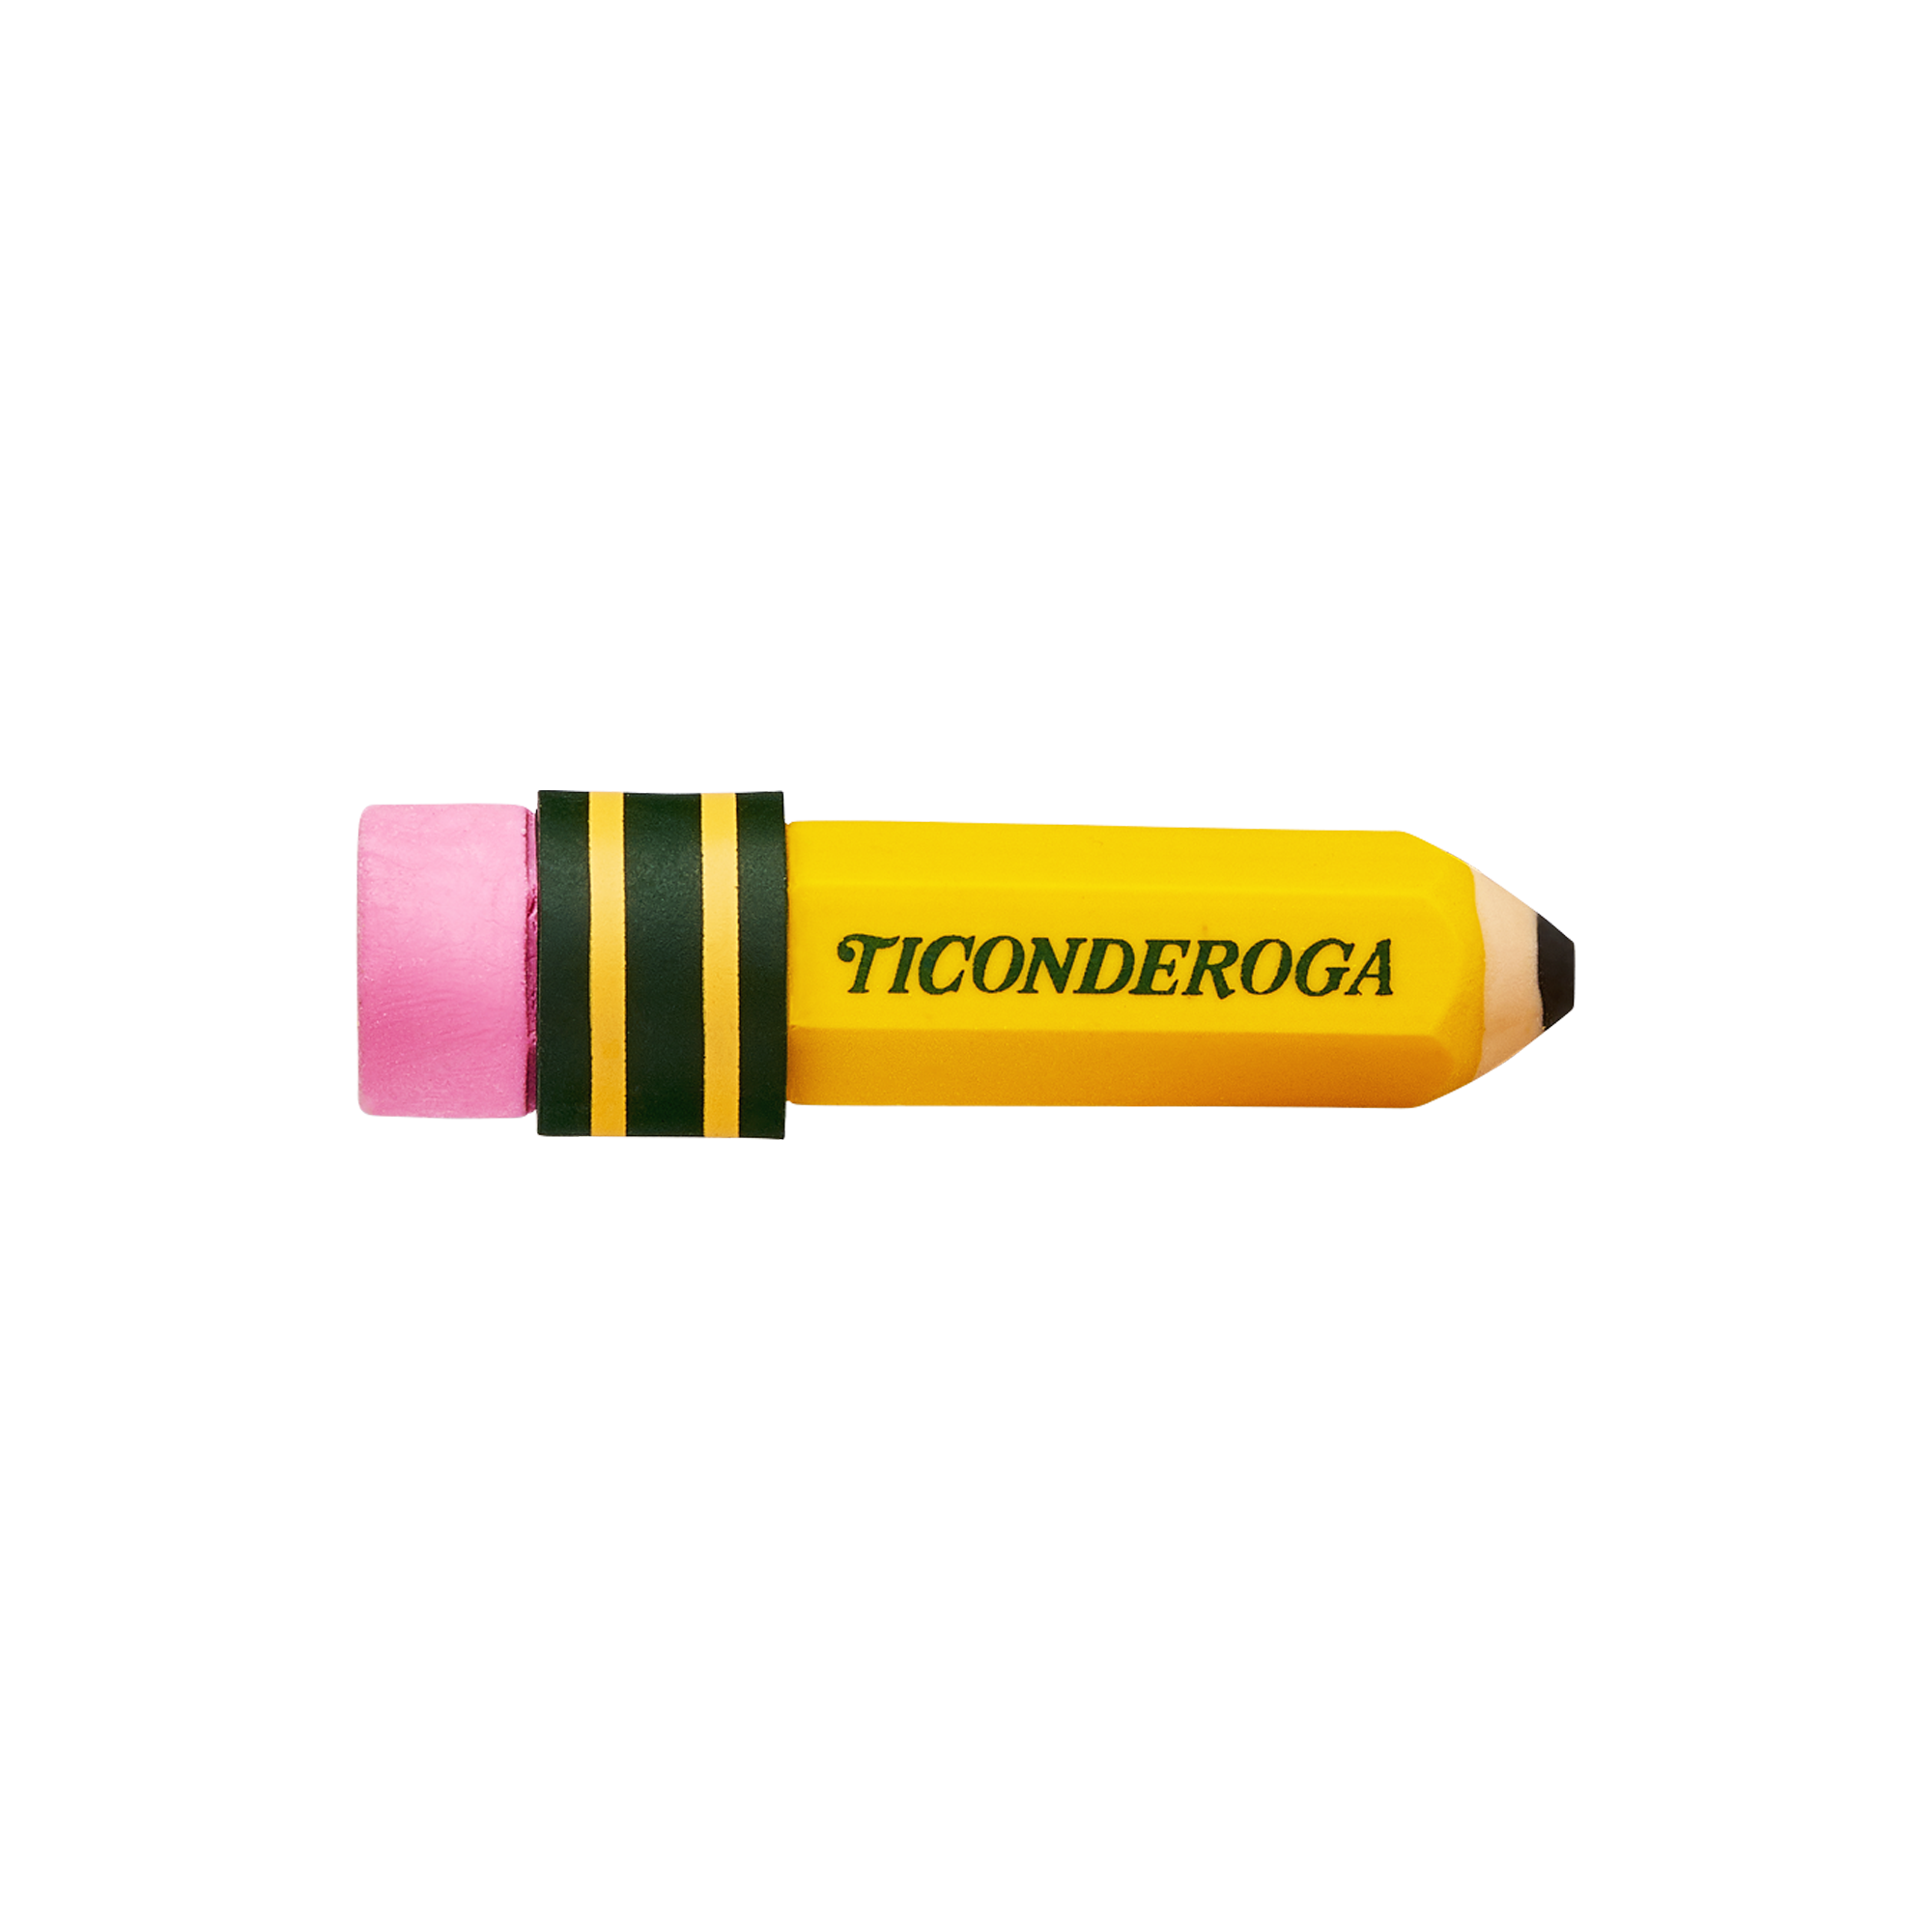 3-pack 389532pack for sale online Ticonderoga Pencil-shaped Erasers Latex